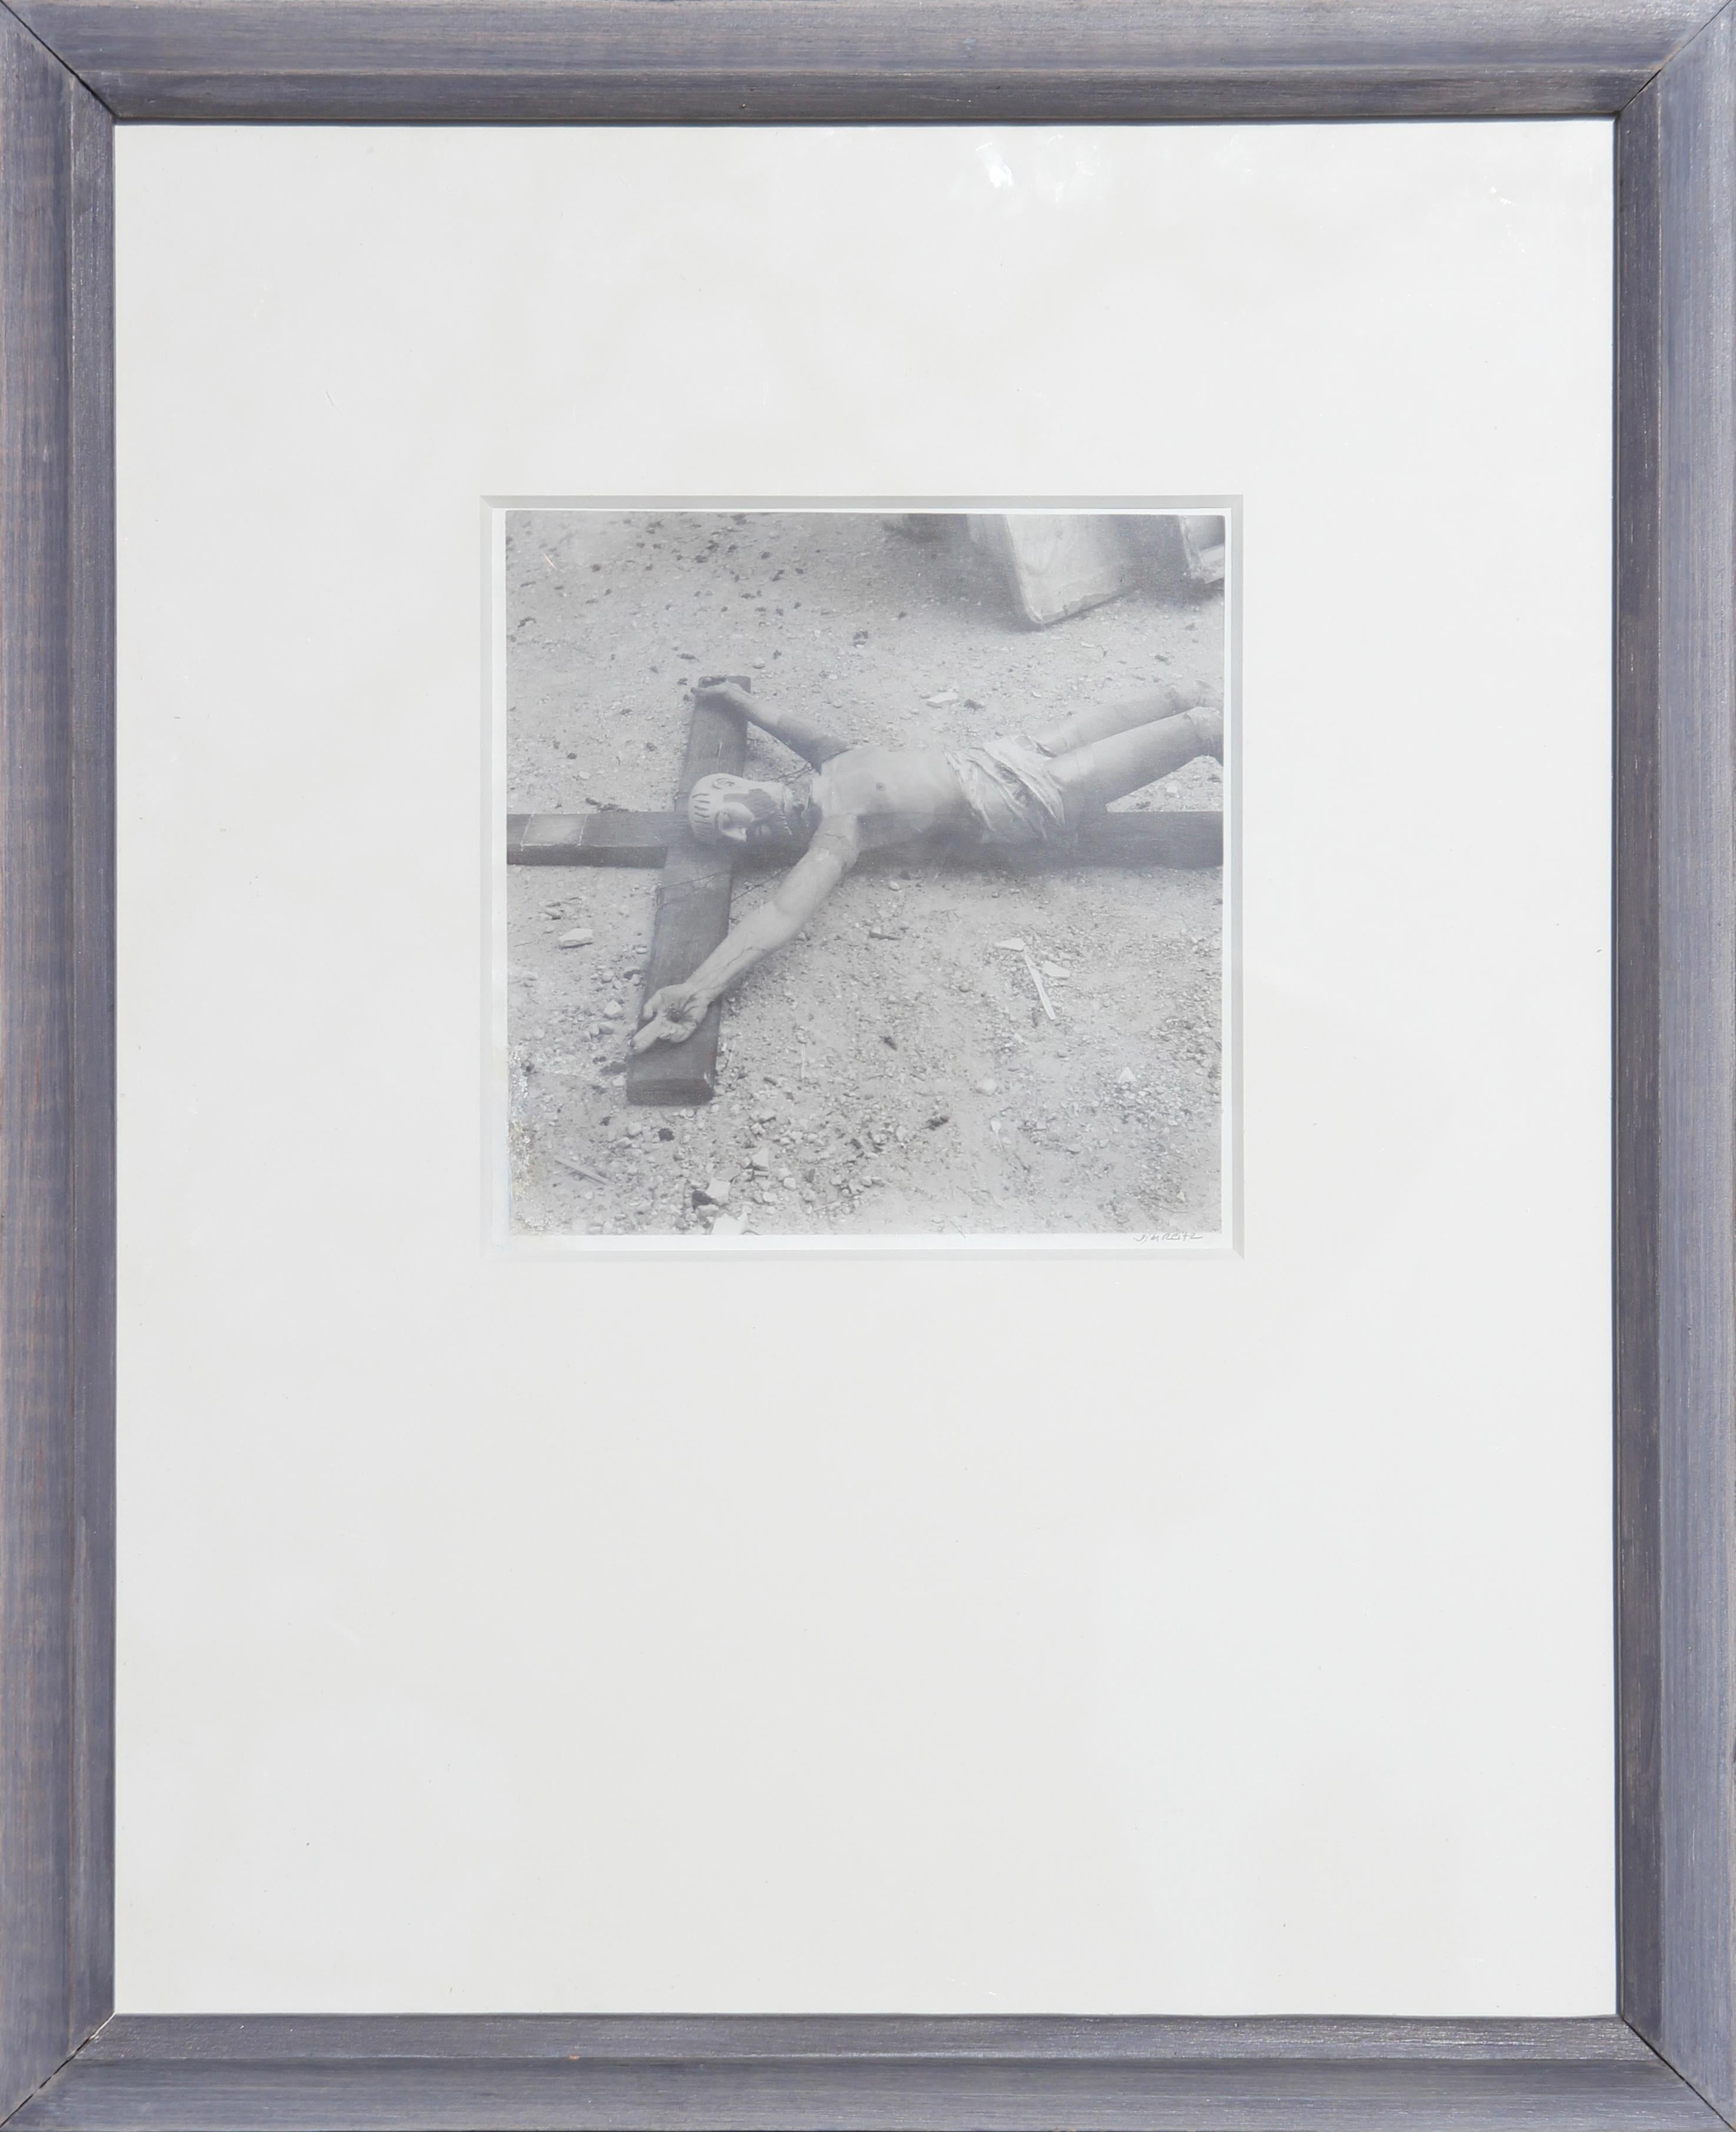 Jim Reitz Still-Life Photograph - Black and White Photograph of a Found Crucifix Sculpture on the Ground